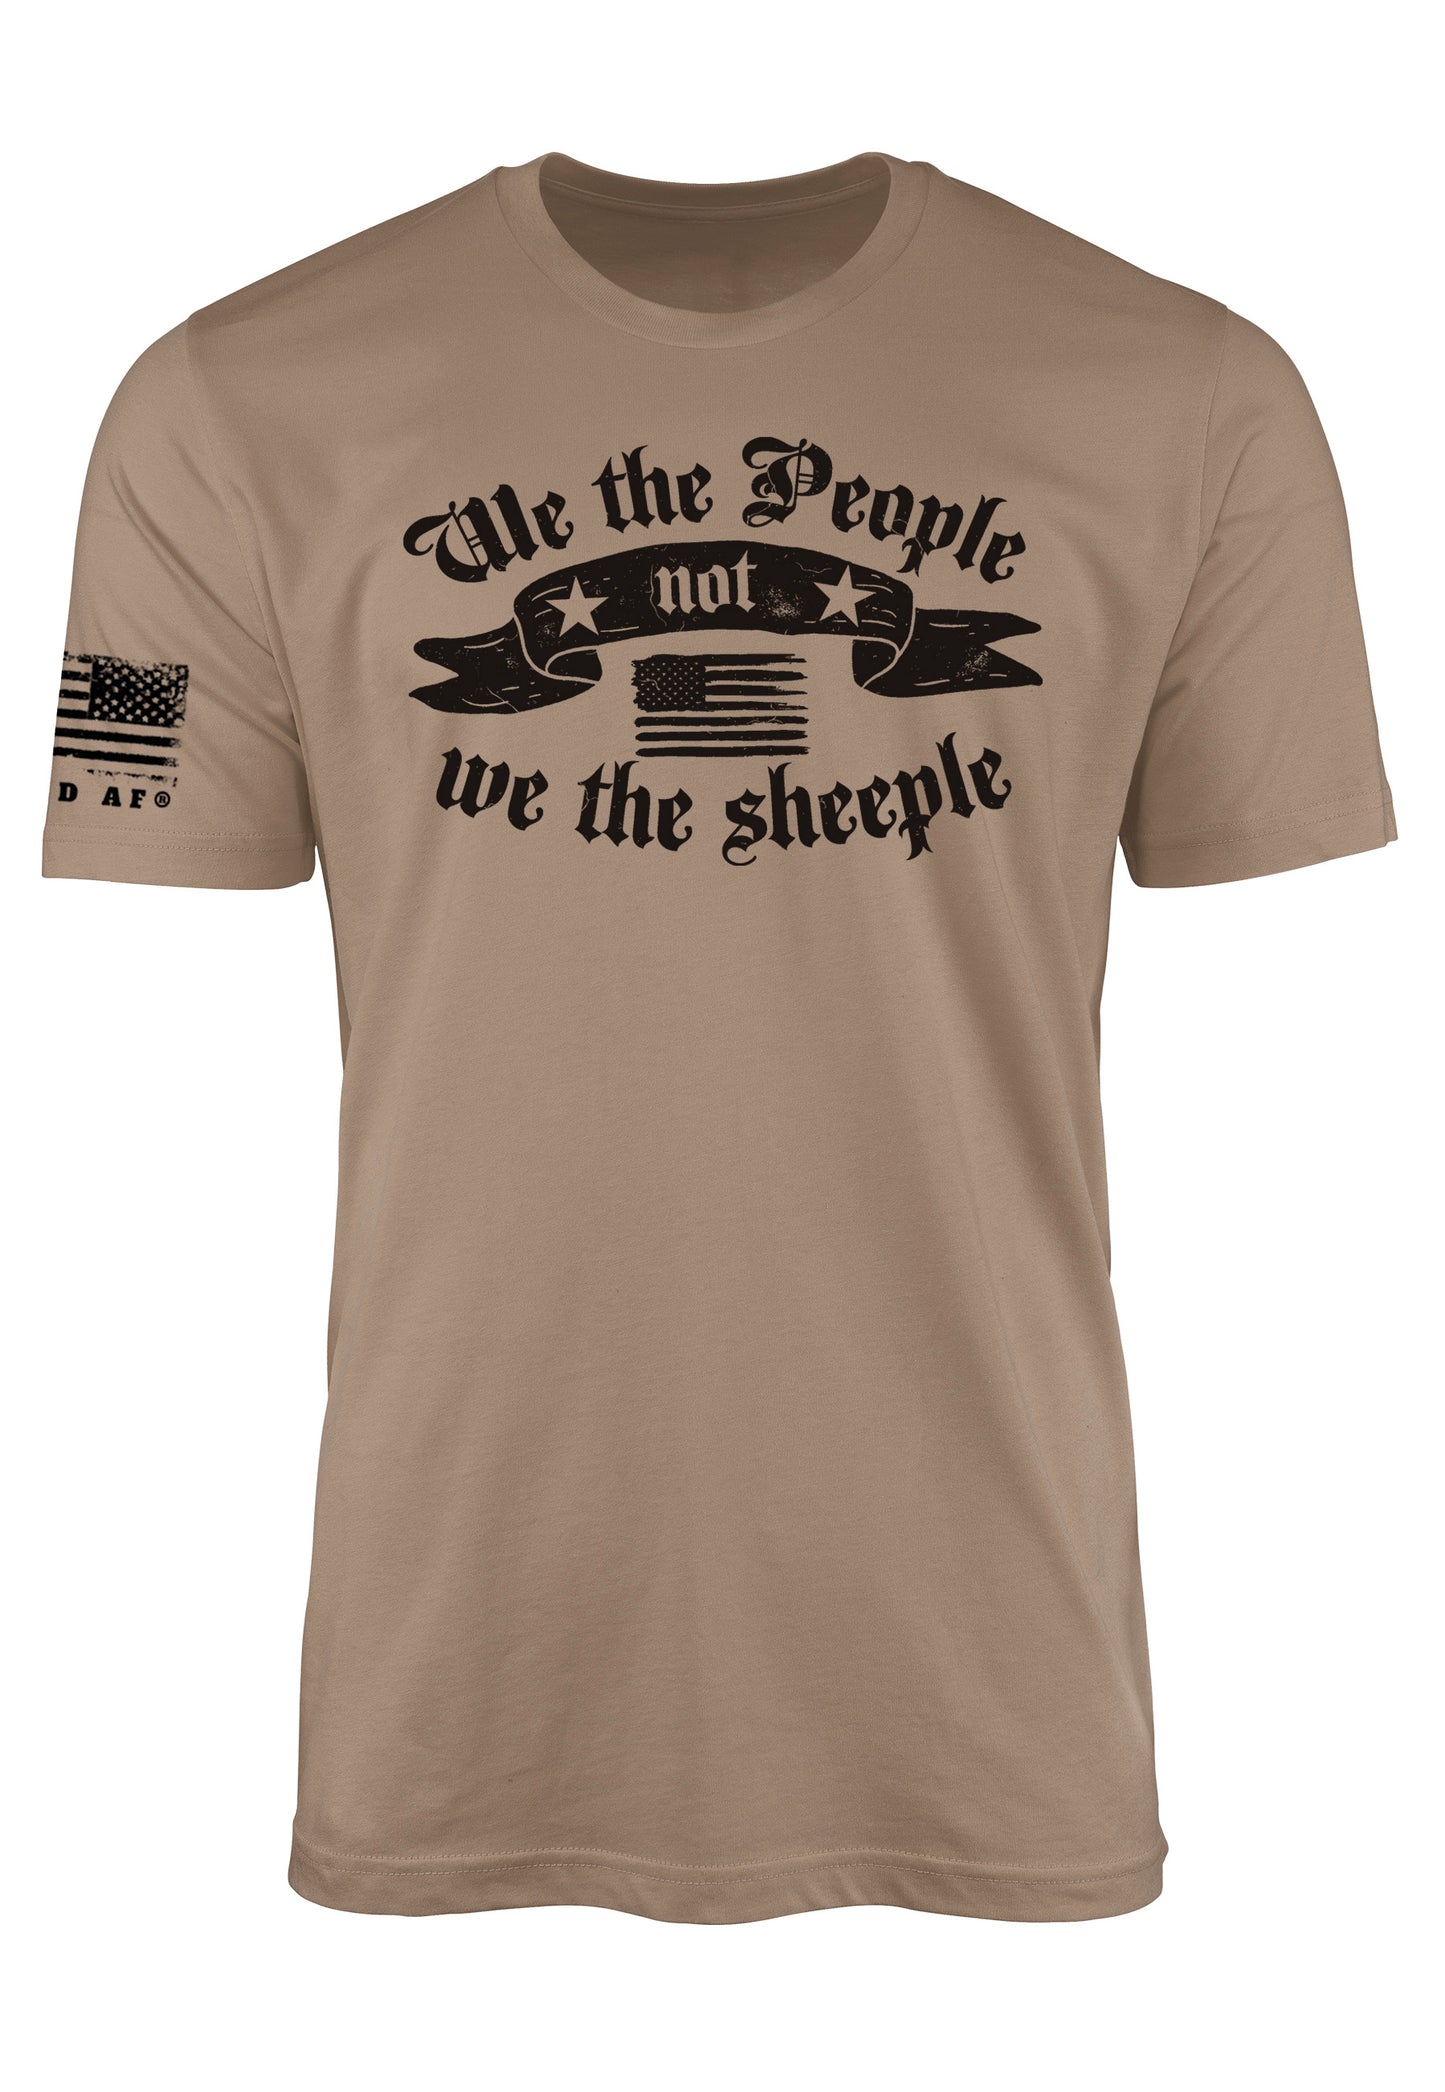 We the People not We the Sheeple t-shirt